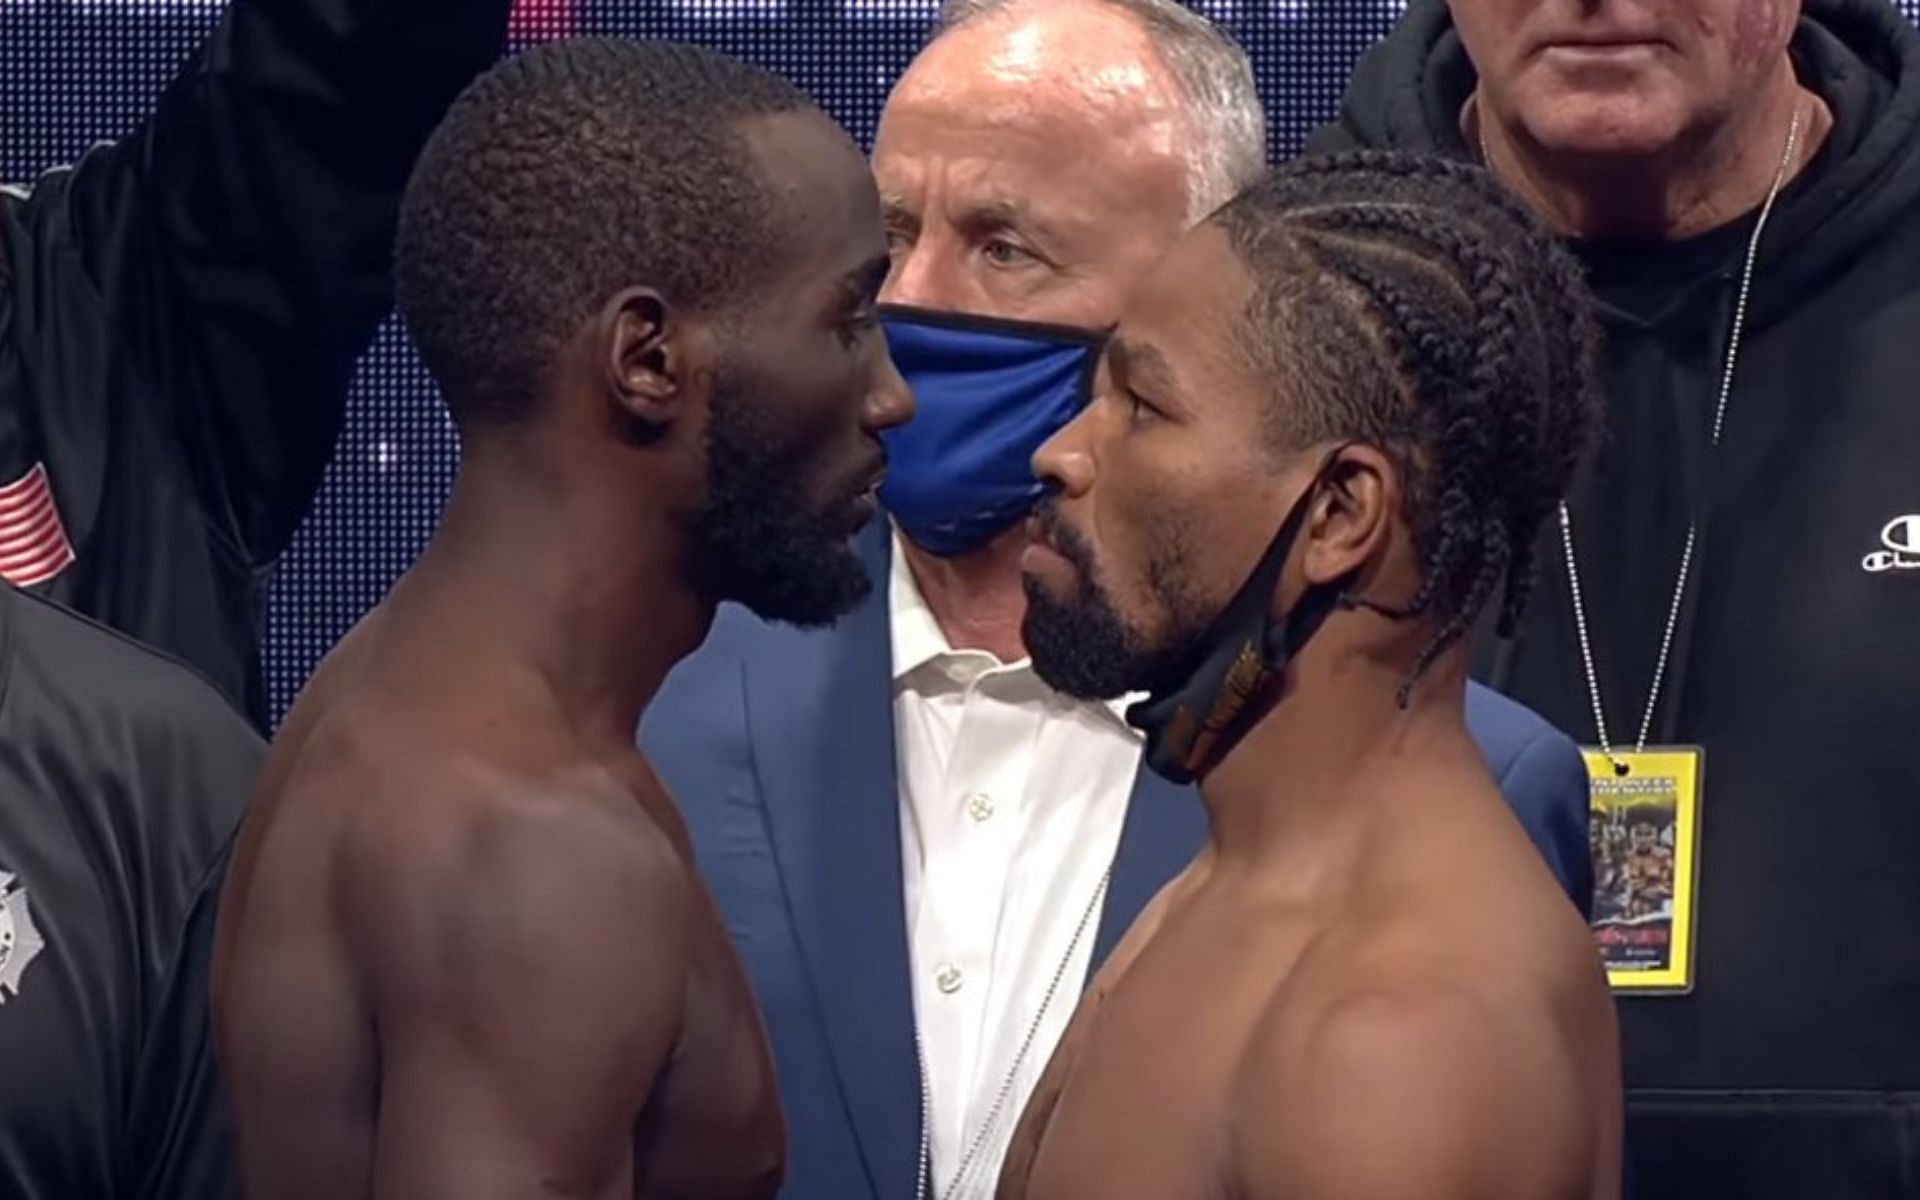 Terence Crawford (left) &amp; Shawn Porter (right) [Image Credits- @jedigoodman on Twitter]